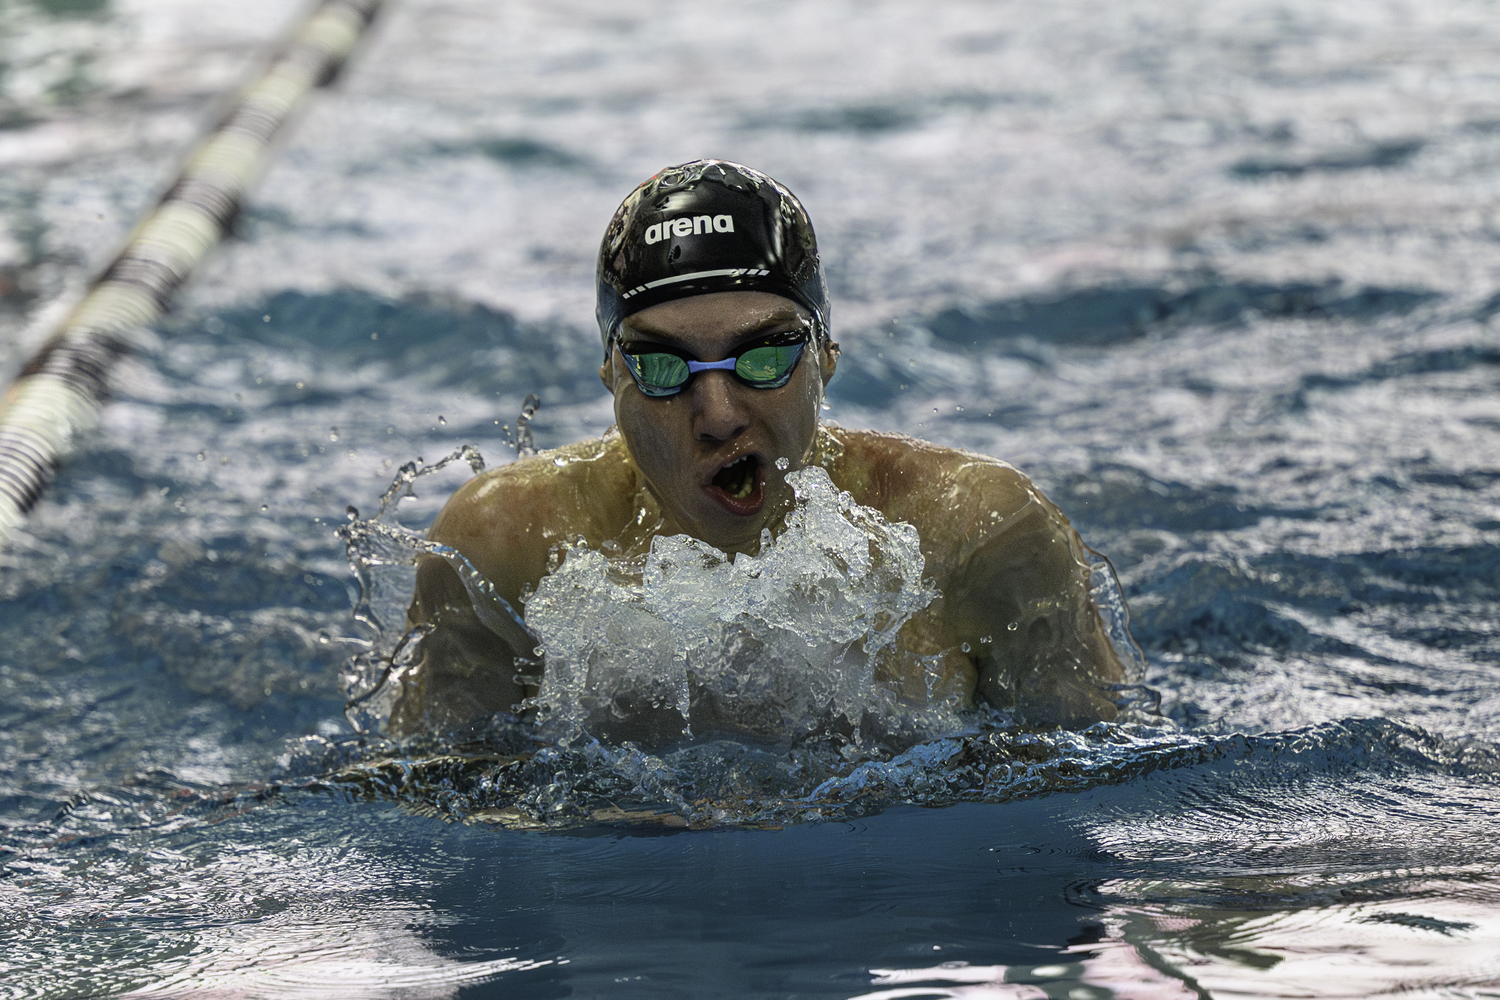 Westhampton Beach senior Max Buchen swam the 100-yard breaststroke in a personal best 54.26 seconds for first place at the Suffolk County boys swimming championships at Stony Brook University February 10. Buchen also placed first in the 200 individual medley (1:52.31). MARIANNE BARNETT